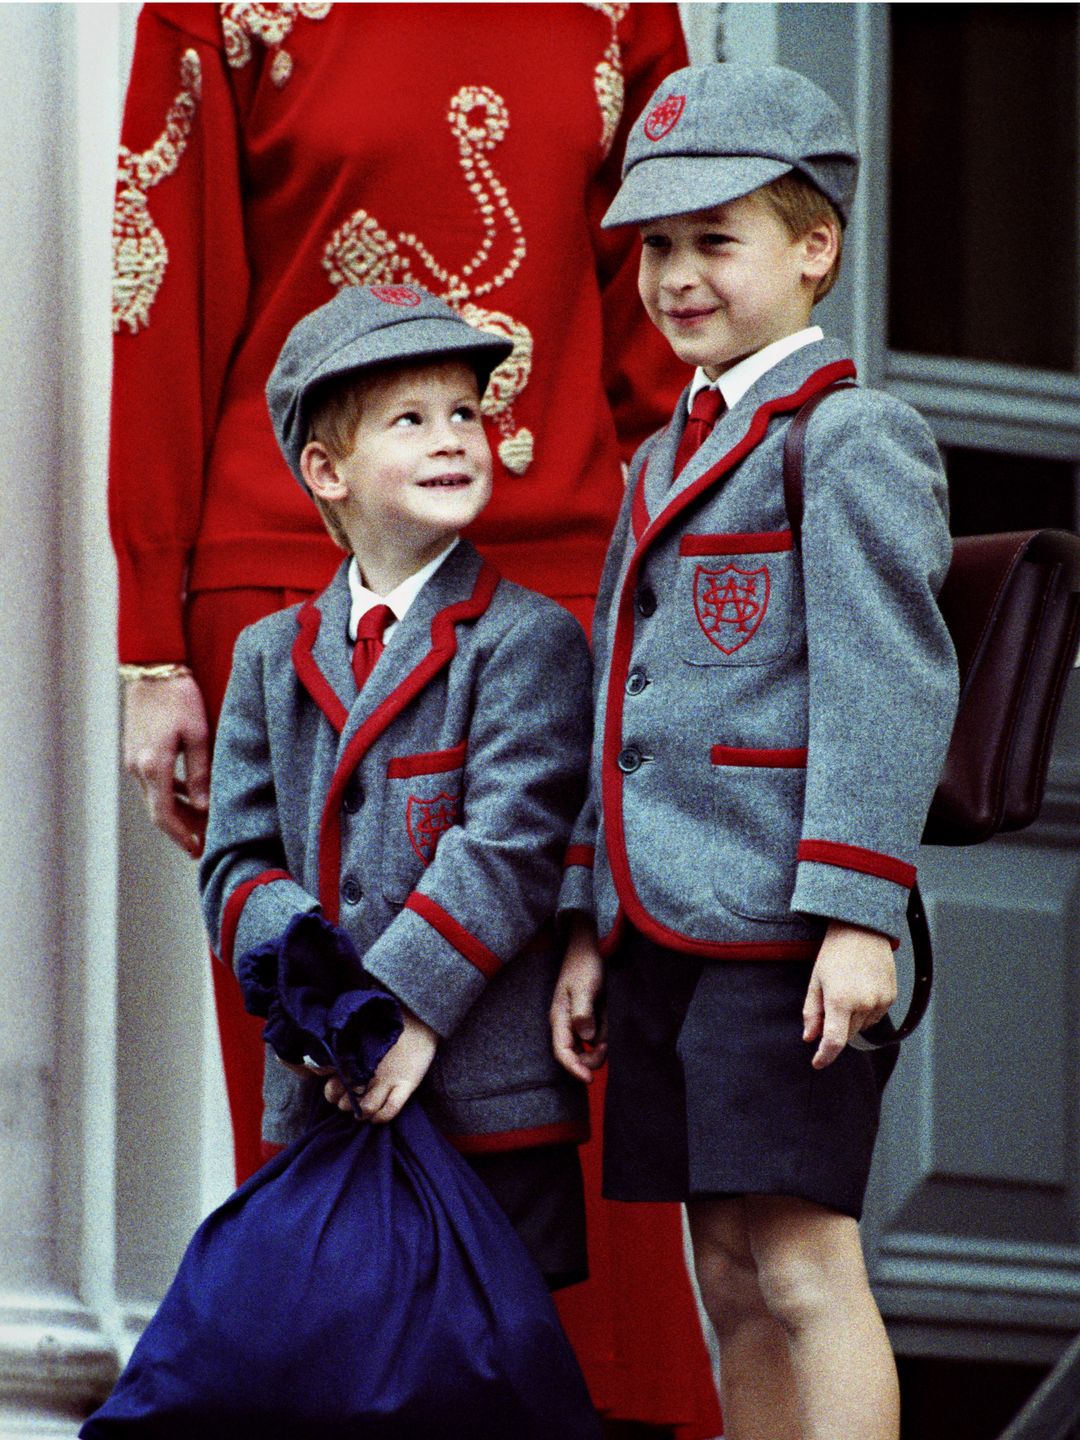 A young Prince Harry and Prince William in school uniform